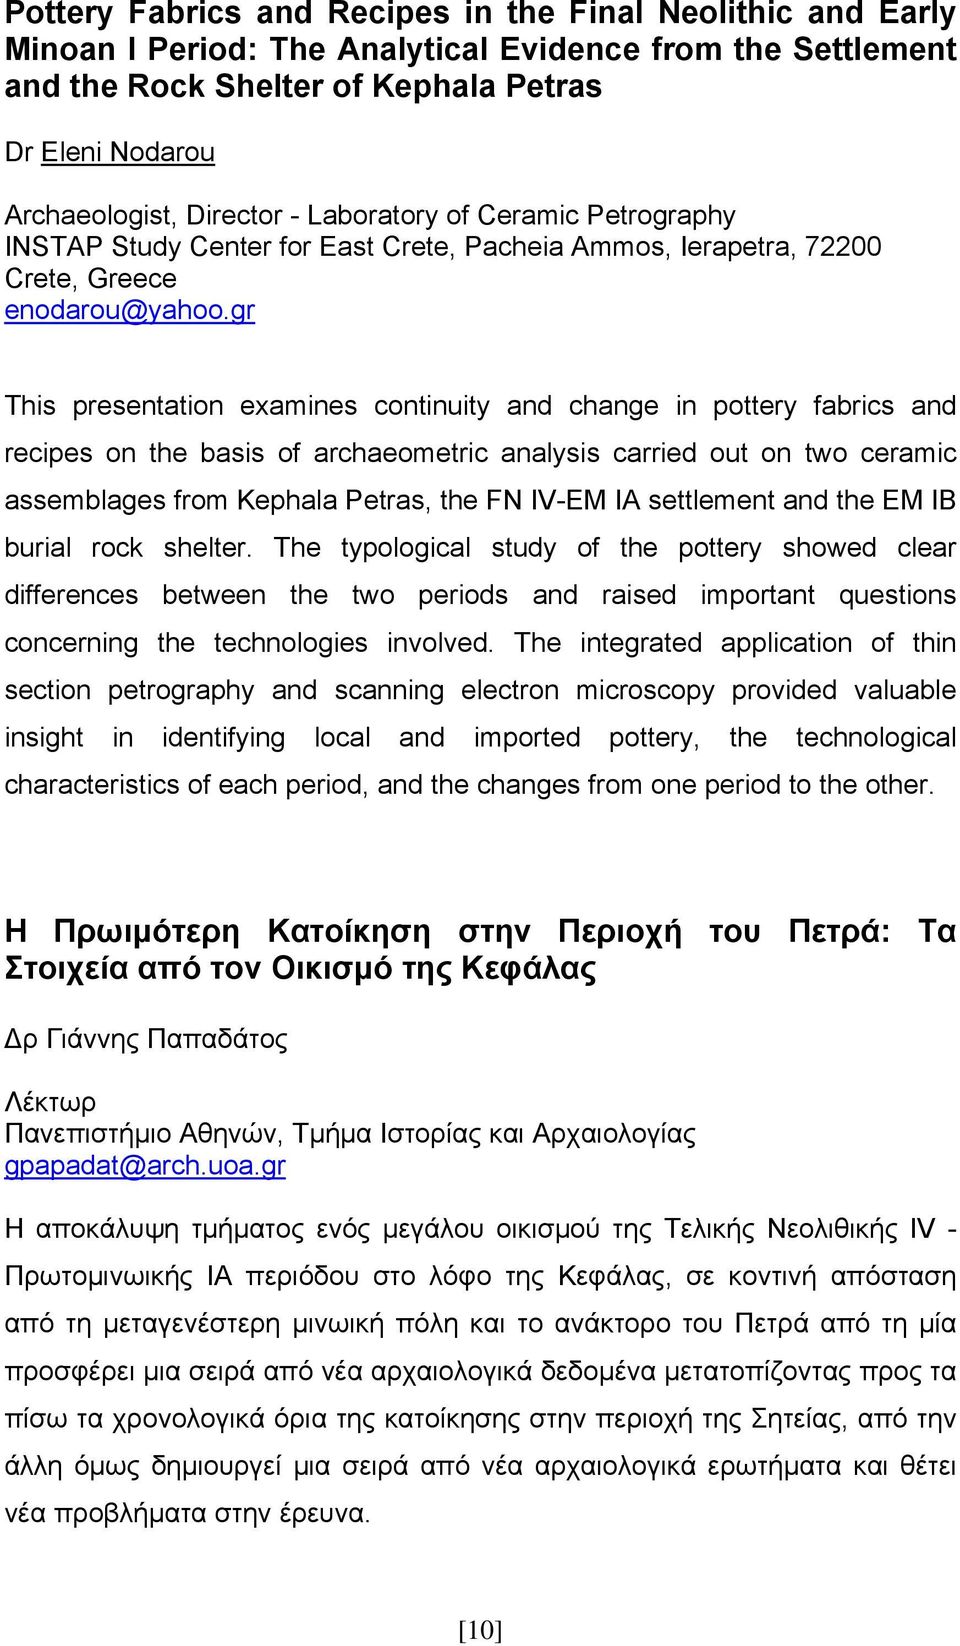 gr This presentation examines continuity and change in pottery fabrics and recipes on the basis of archaeometric analysis carried out on two ceramic assemblages from Kephala Petras, the FN IV-EM IA